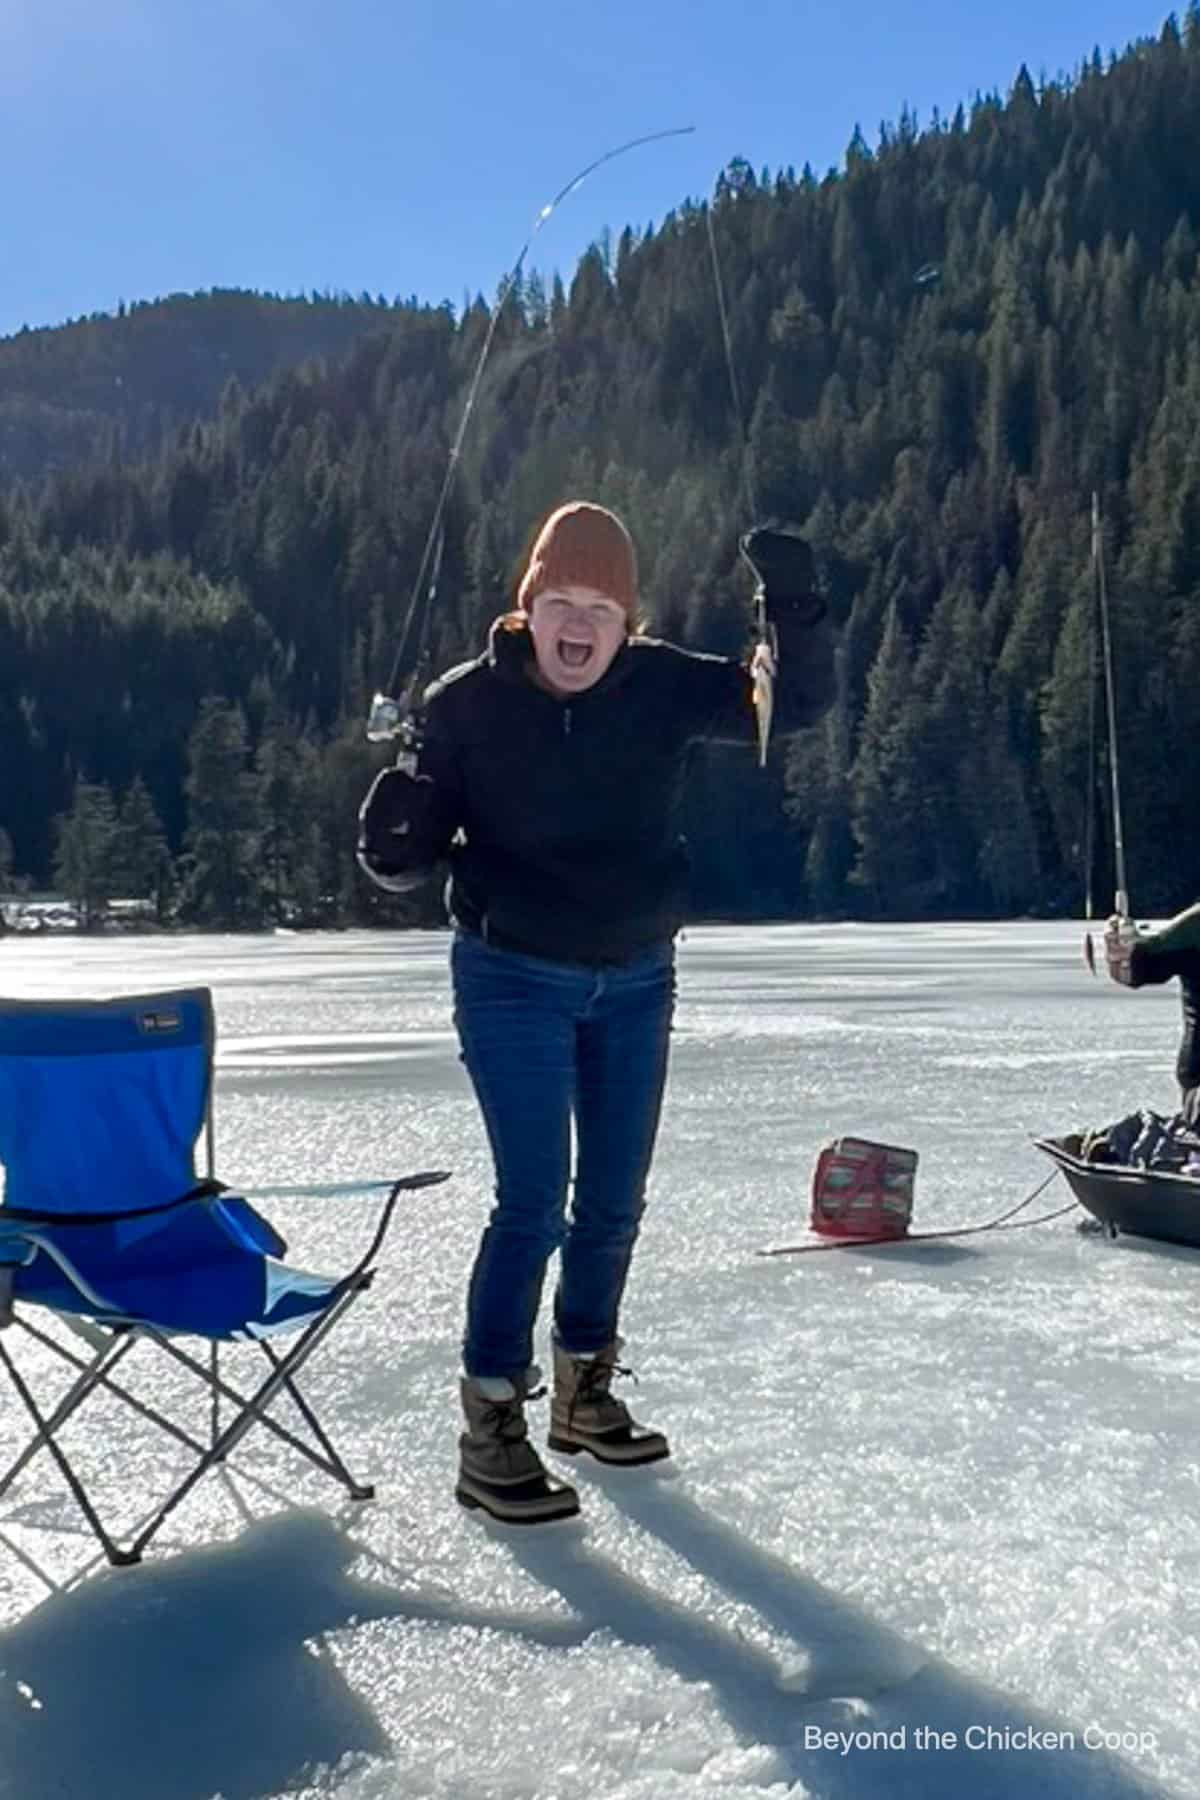 Catching a small fish while ice fishing. 